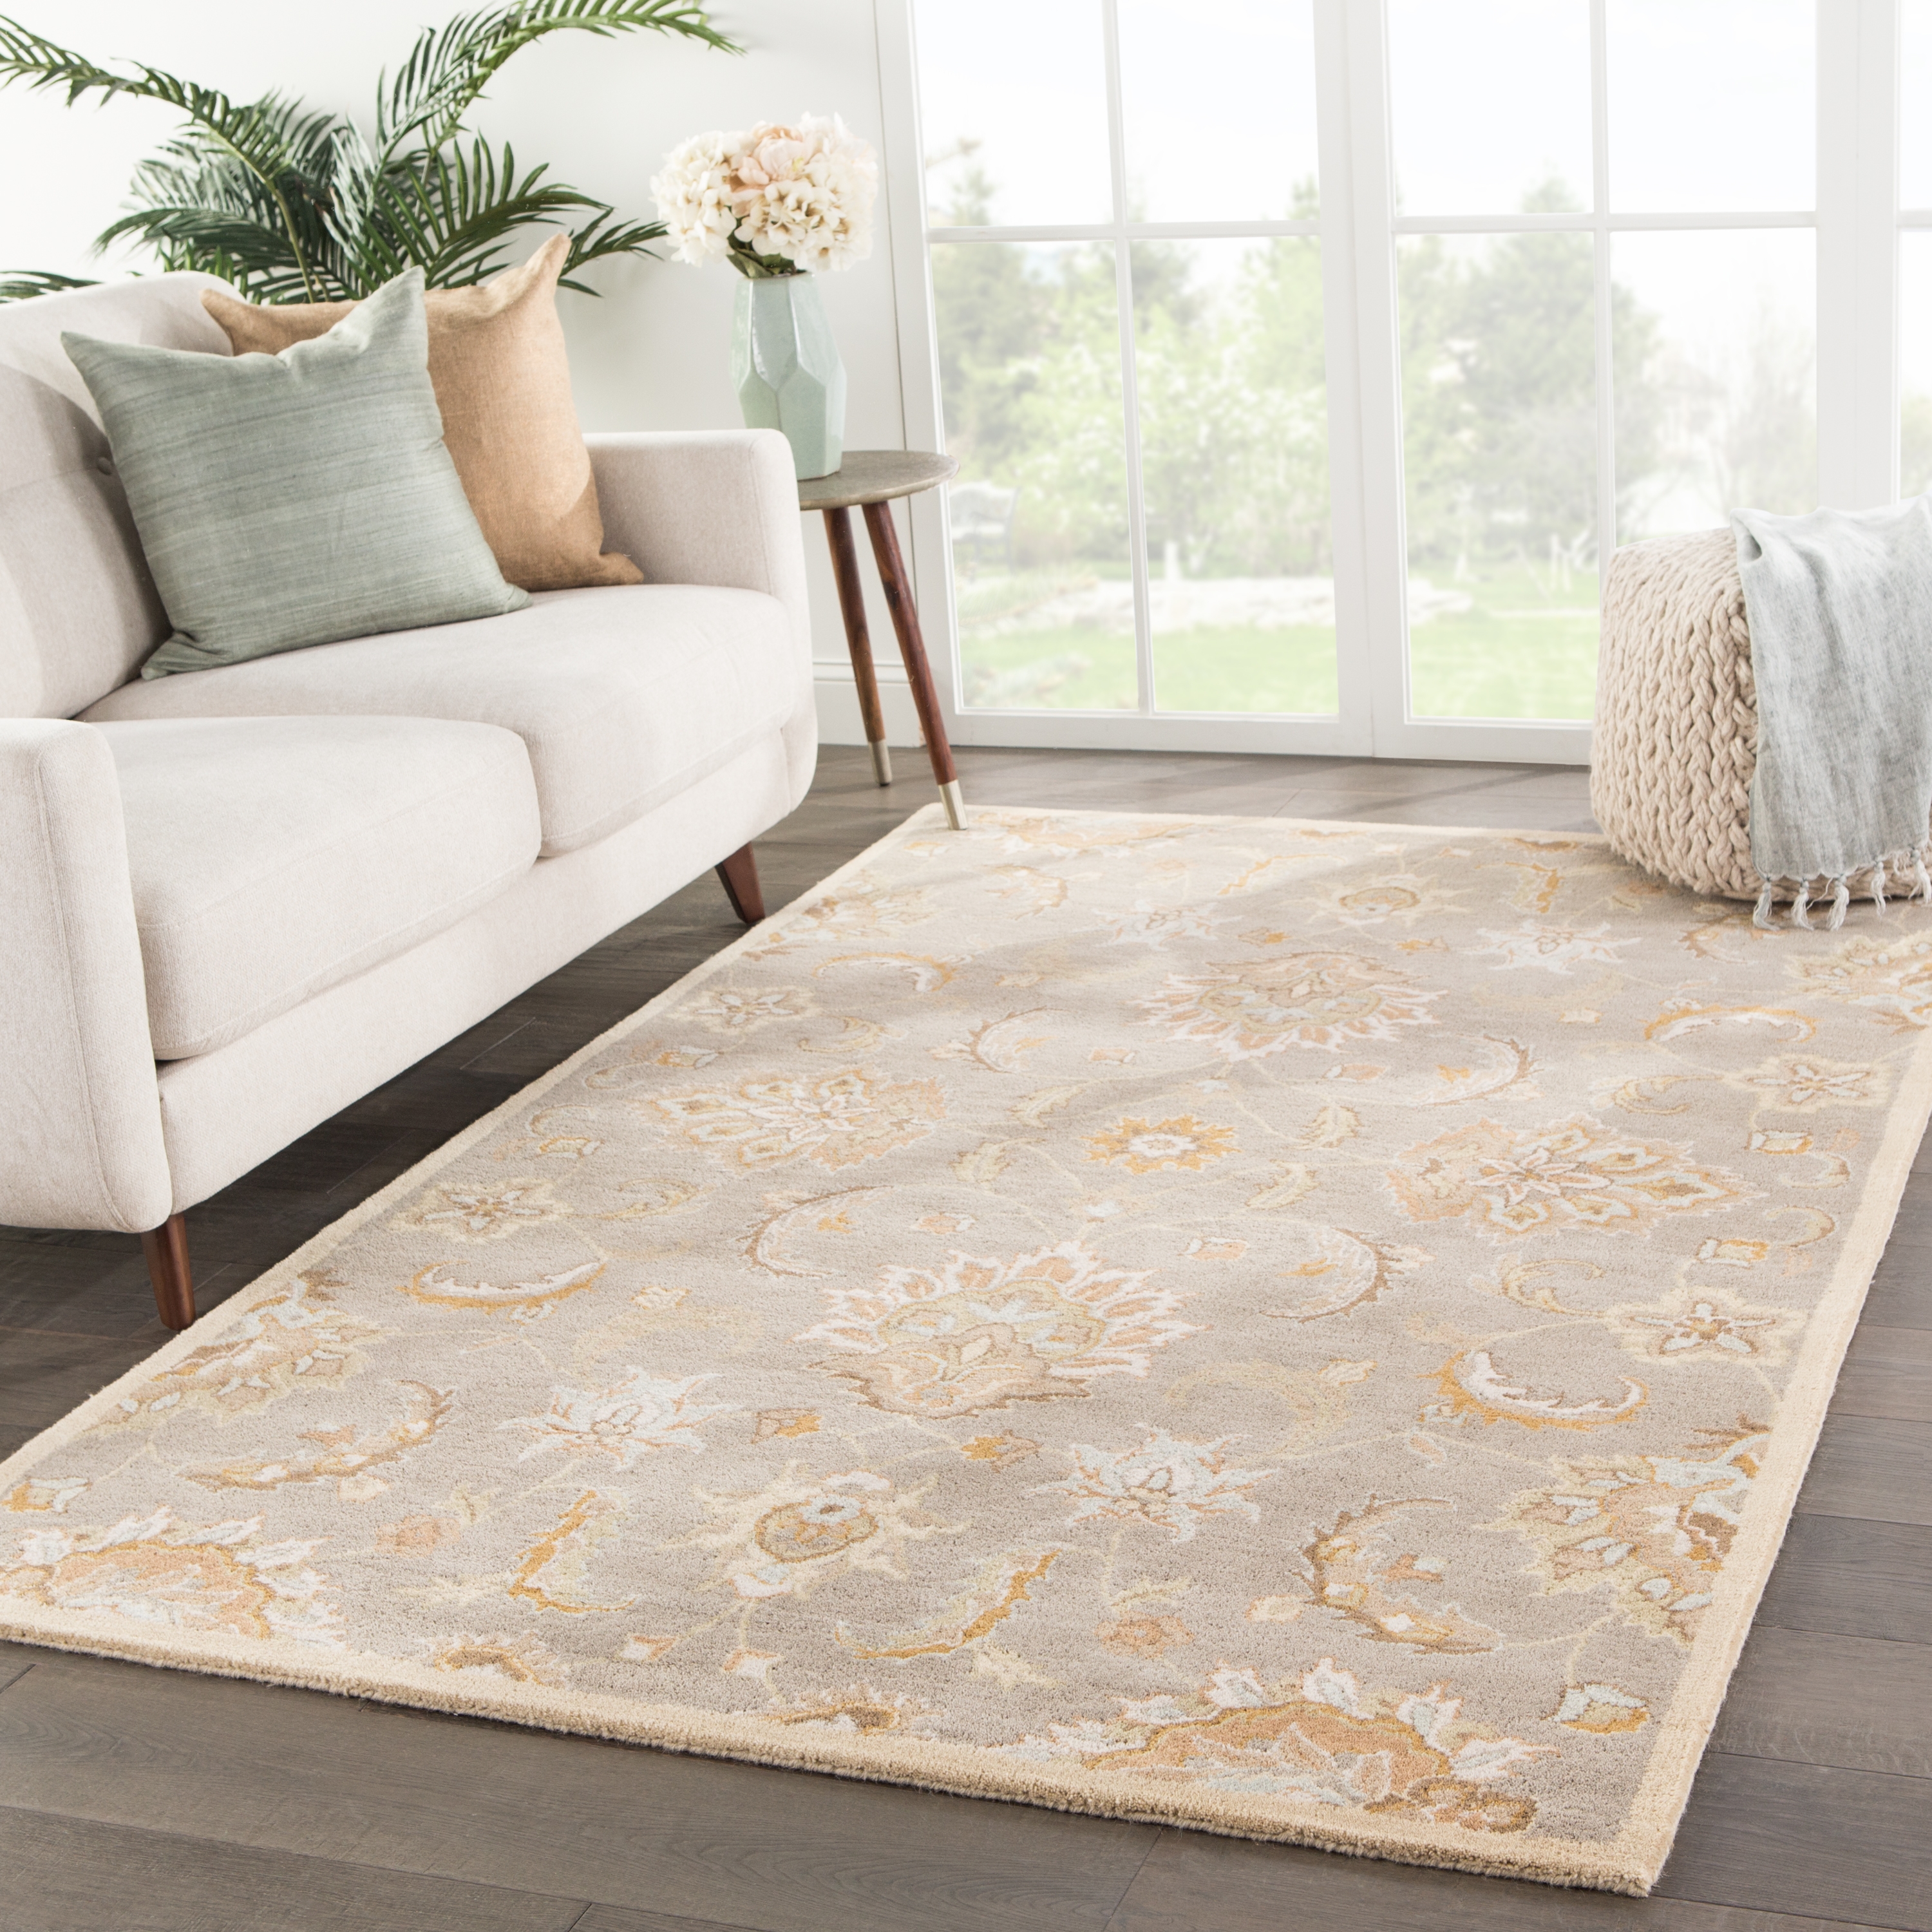 Abers Handmade Floral Gray/ Beige Area Rug (10' X 14') - Image 4